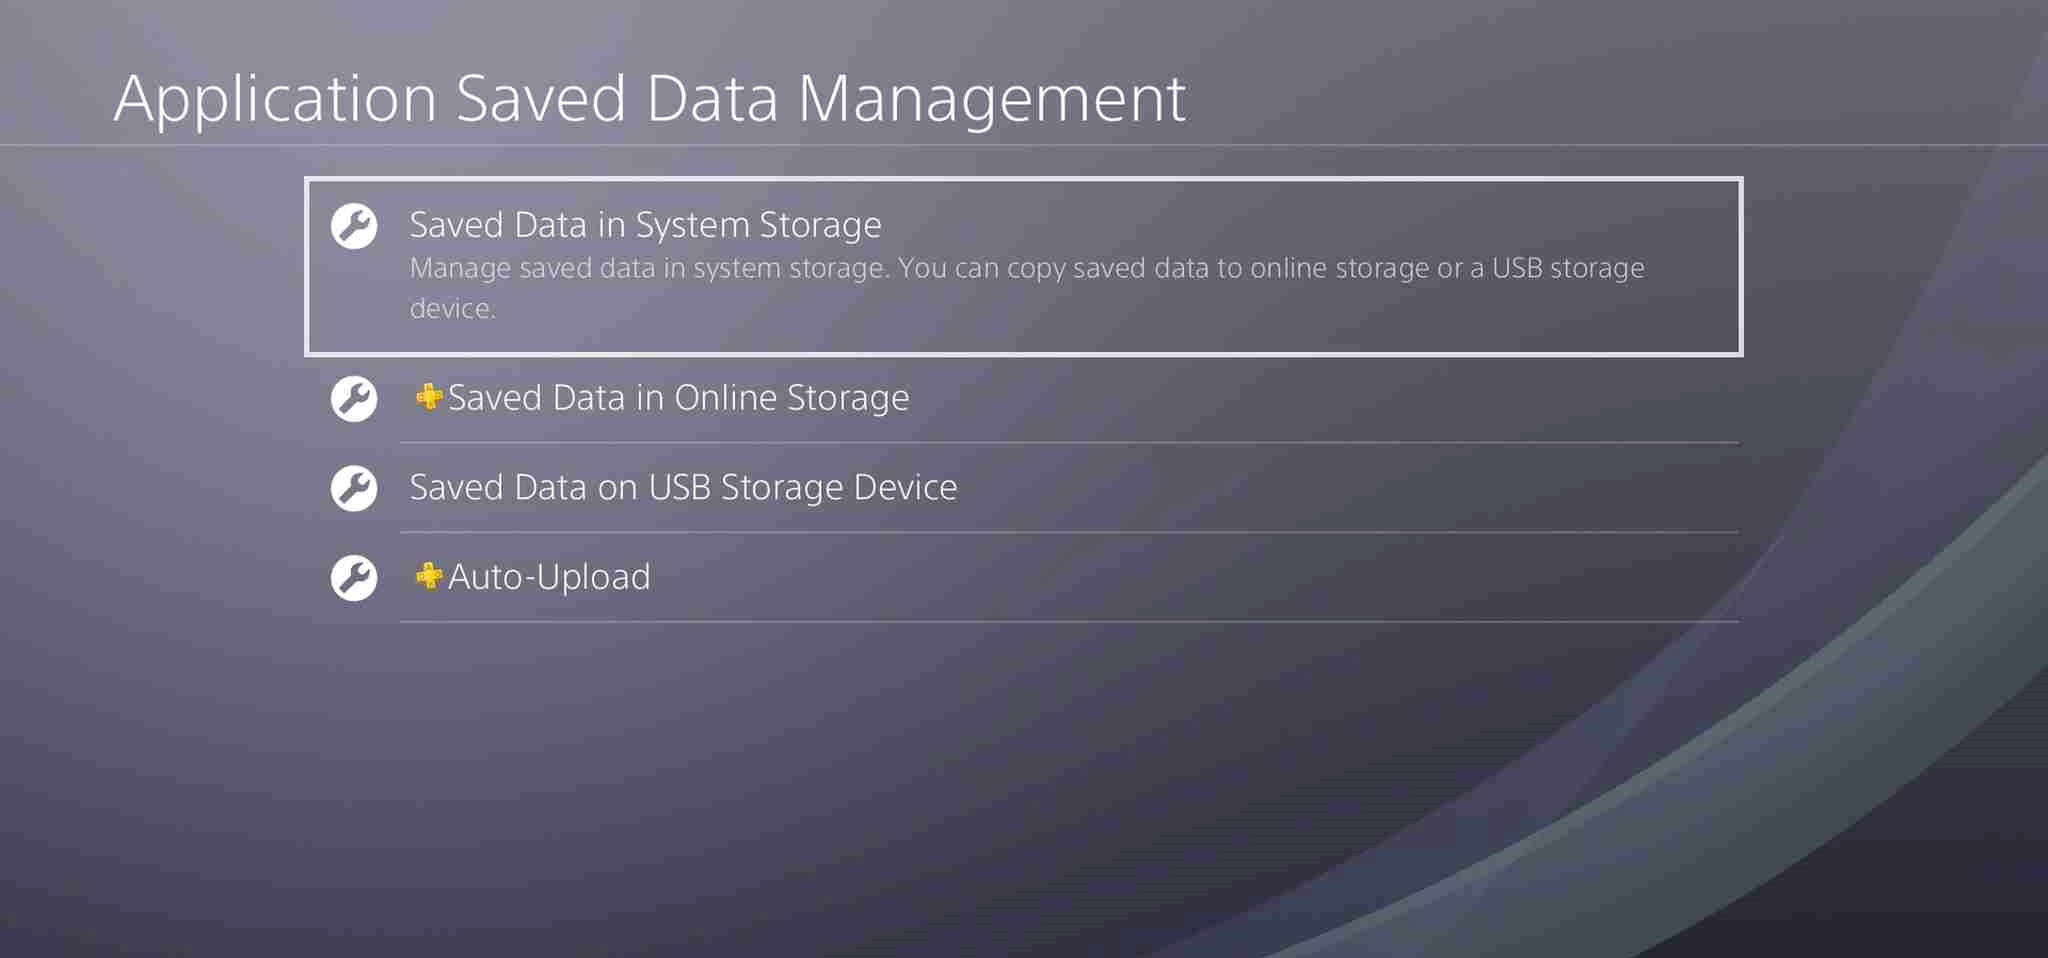 Select the saved data from application saved data management